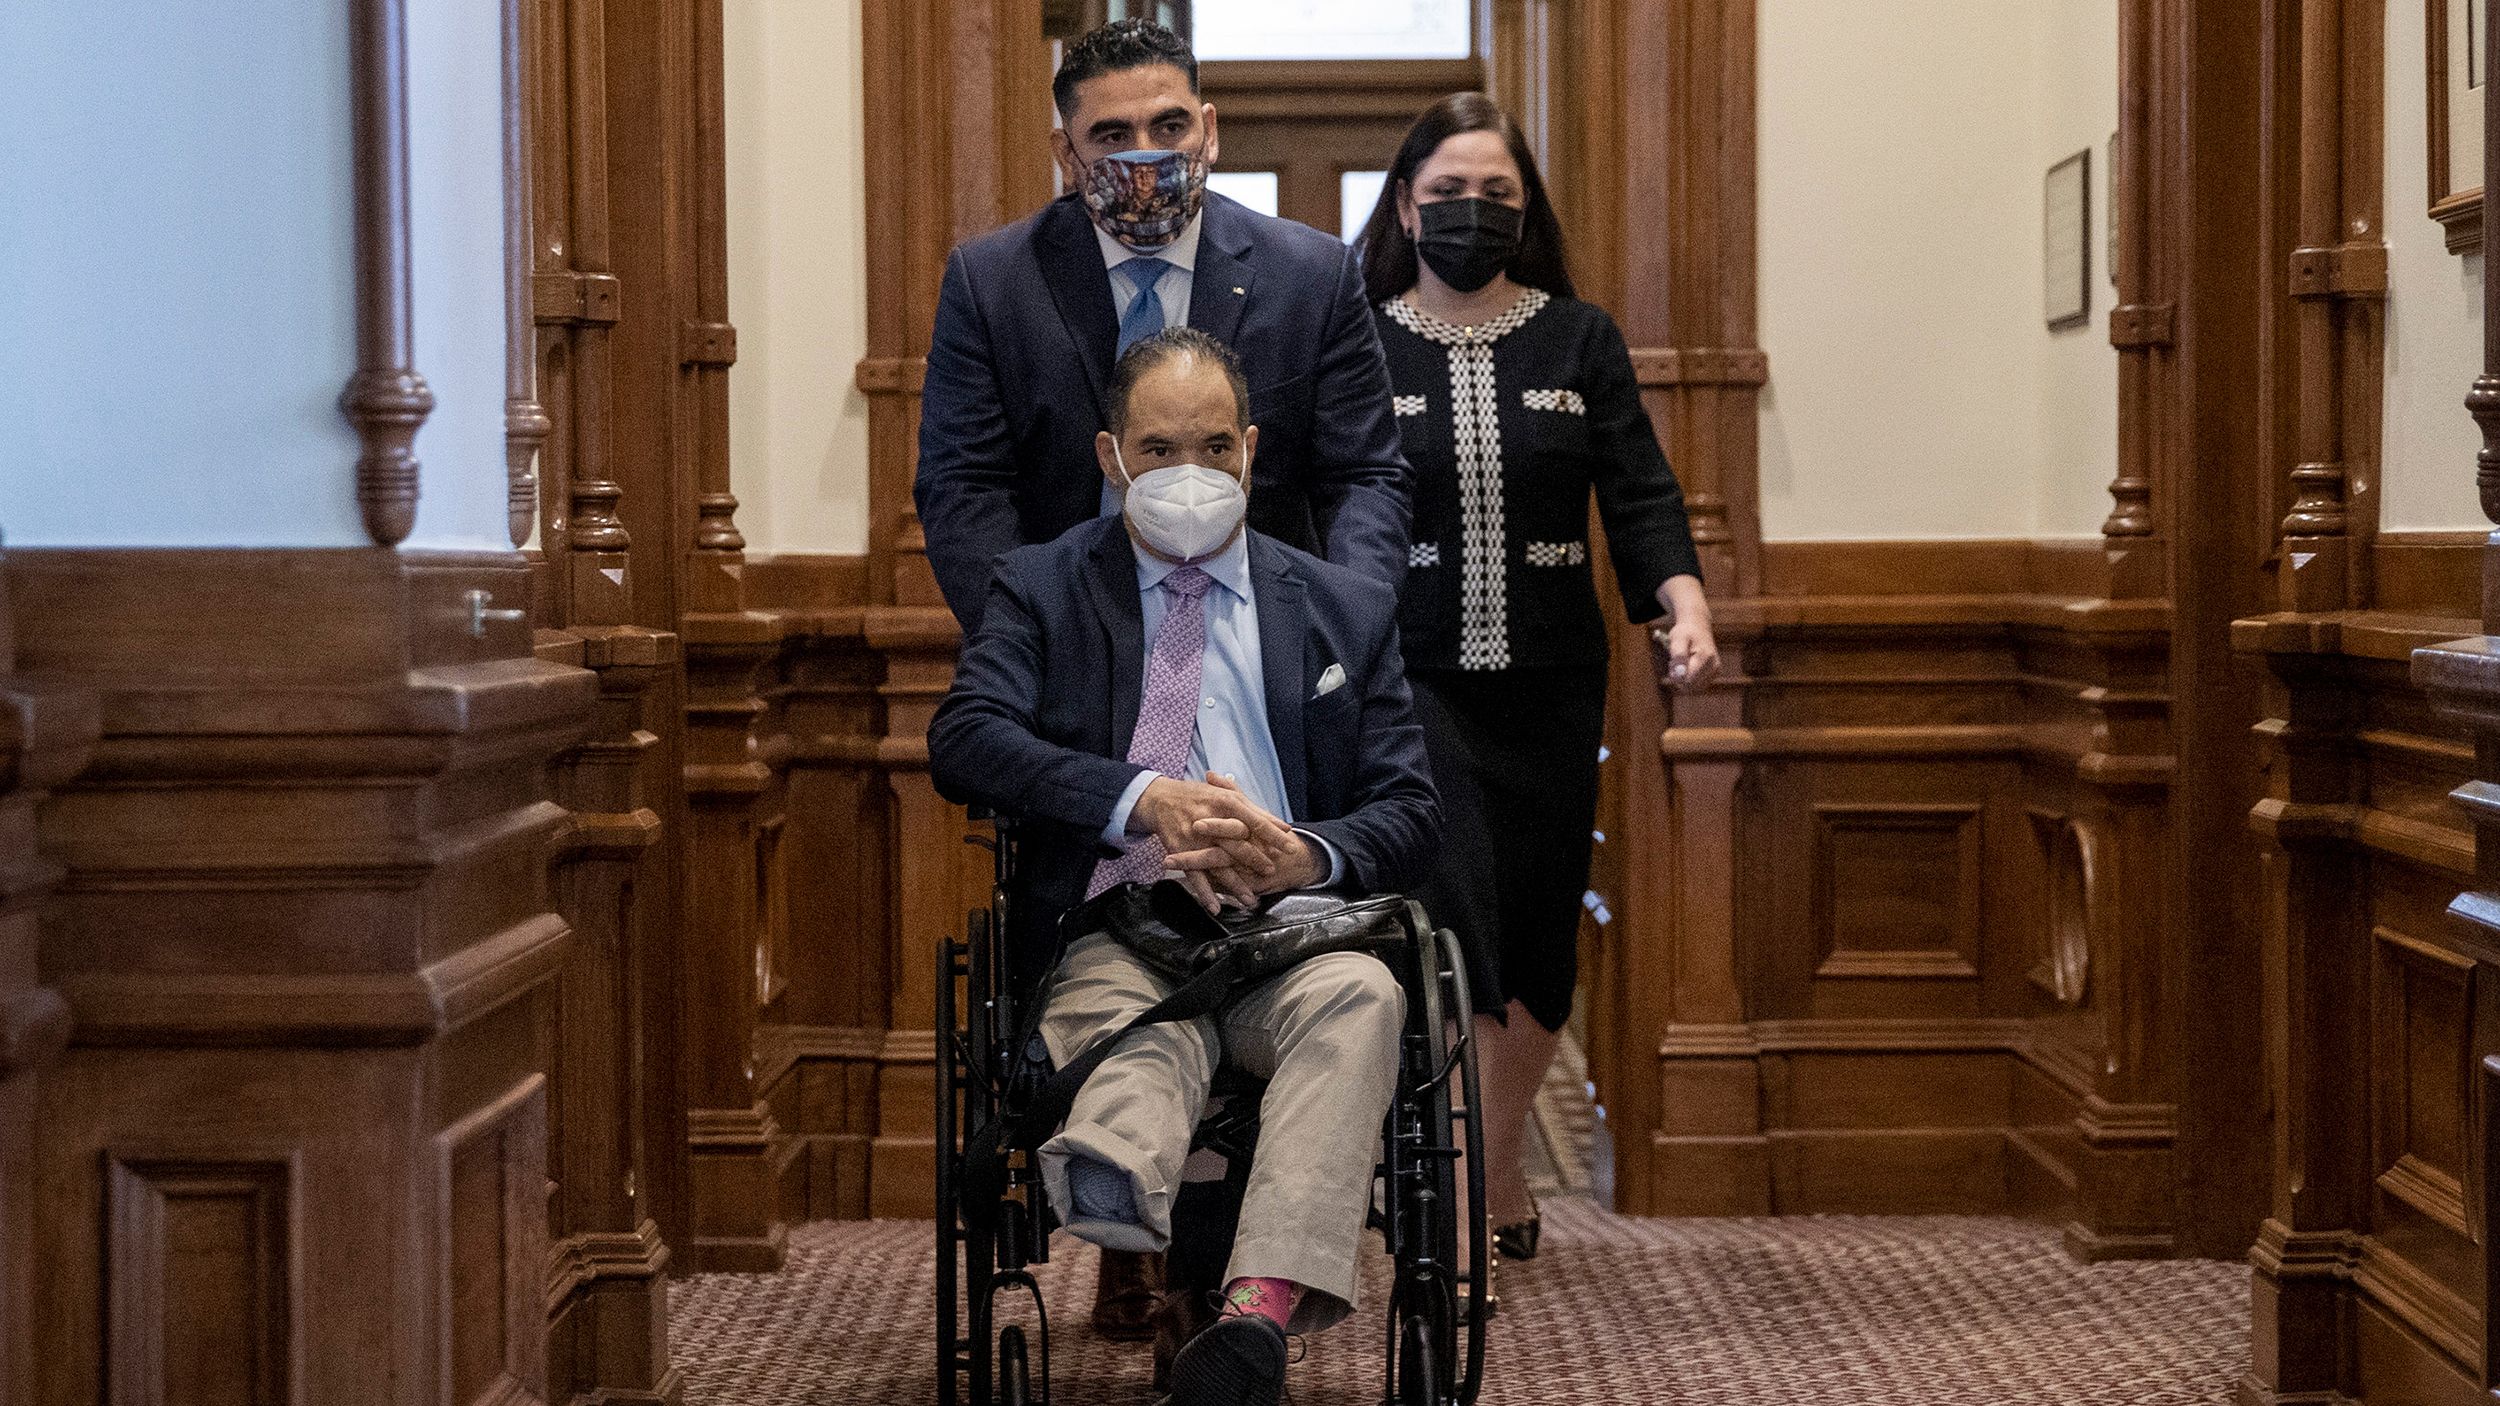 State Rep. Armando Walle, D-Houston, left to right, Rep. Garnet F. Coleman, D-Houston, and Rep. Ana Hernandez, D-Houston, enter the House Chamber at the Capitol in Austin, Texas, on Thursday August 19, 2021.